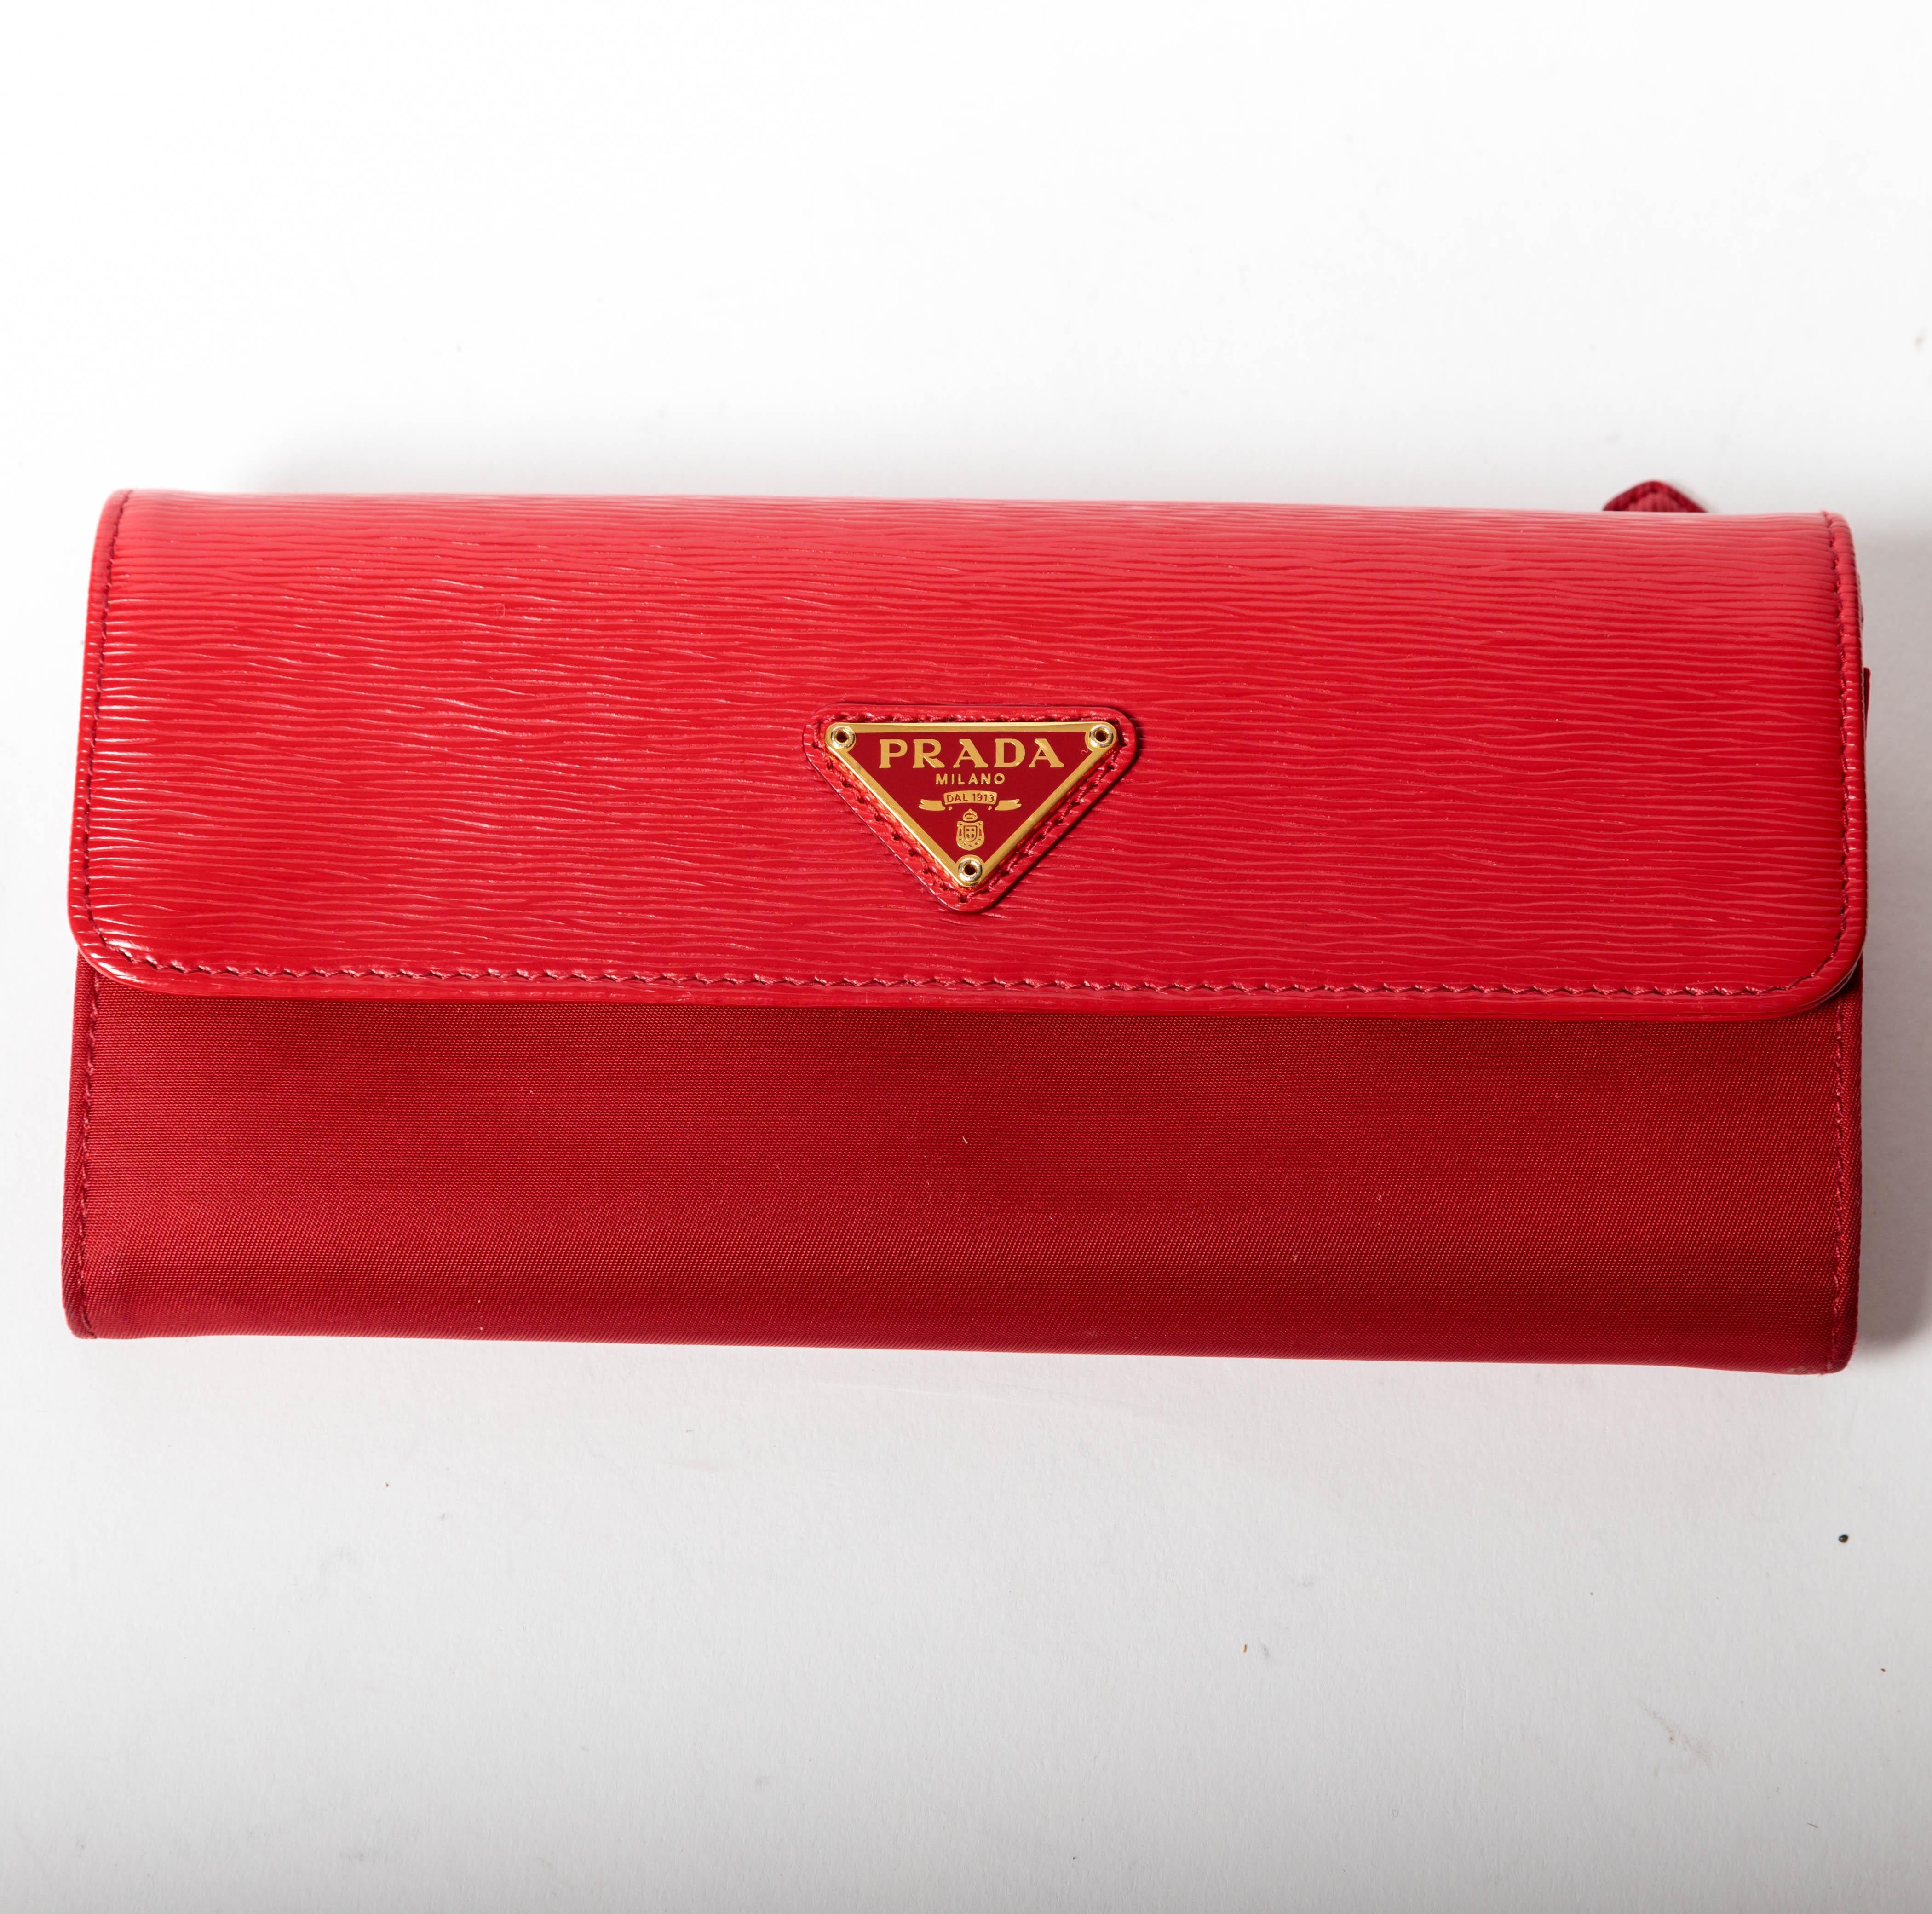 Incredibly chic Prada long wallet with snap on credit card case.
With slots for credit cards, several deep pockets for bills and a center zip compartment for coins and an outside zip pocket, this wallet is simply perfect.
Condition is very good with